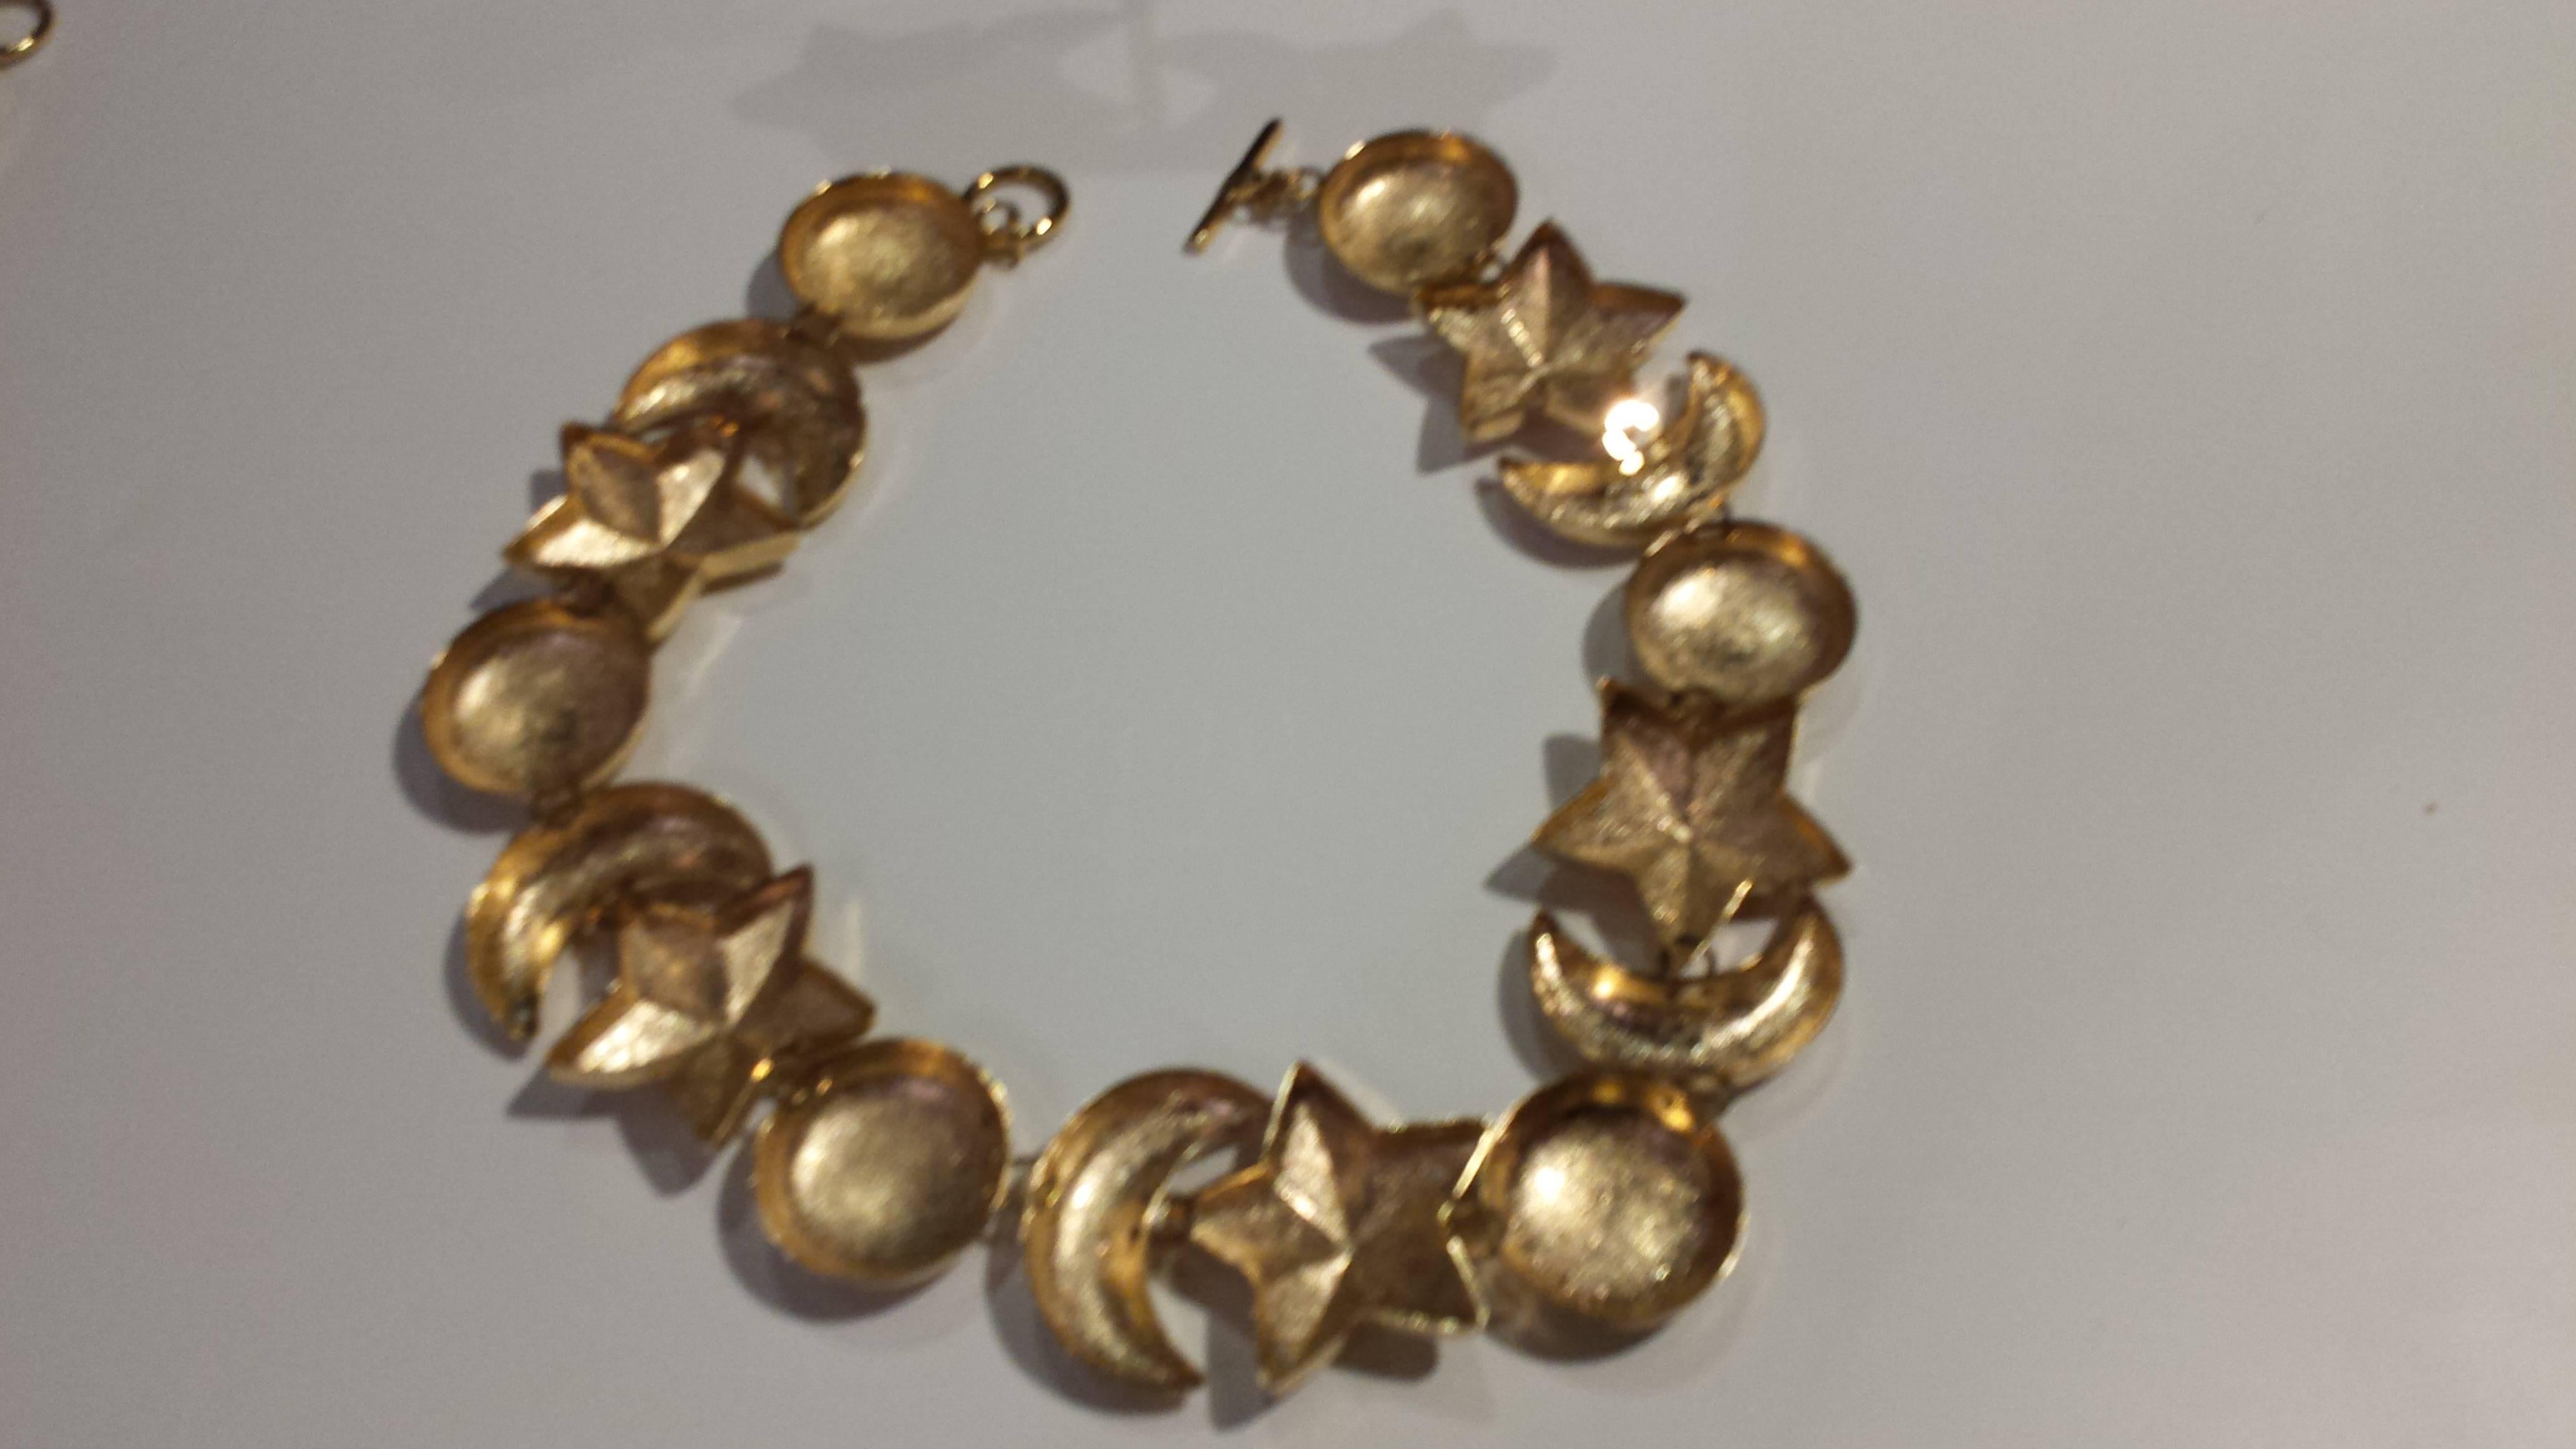 Stunning chunky four pieces. Set of inspired celestial design from Dior, unmarked- necklace, bracelet and earrings gold tone textured metal.
This set is so much fun to wear, turn heads and garner compliments!

Provenance-purchased in Paris-from the